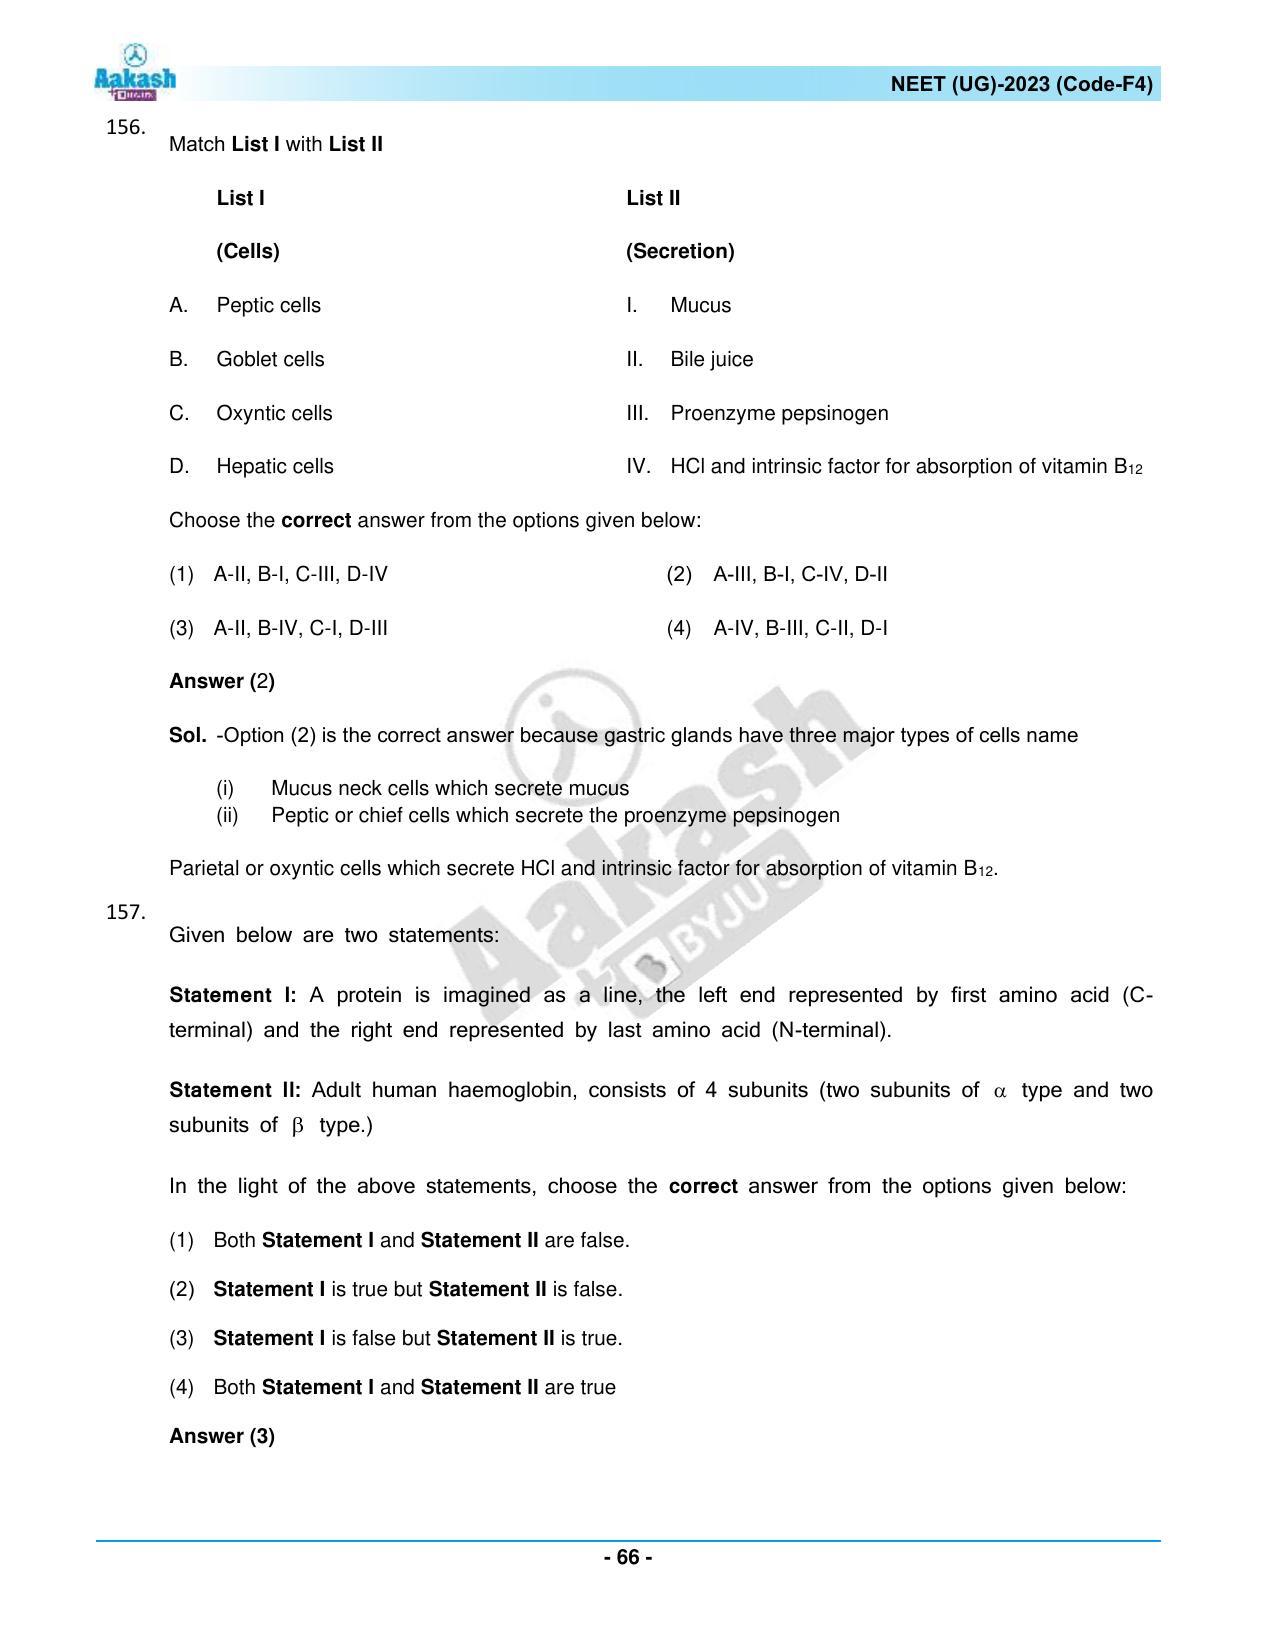 NEET 2023 Question Paper F4 - Page 66